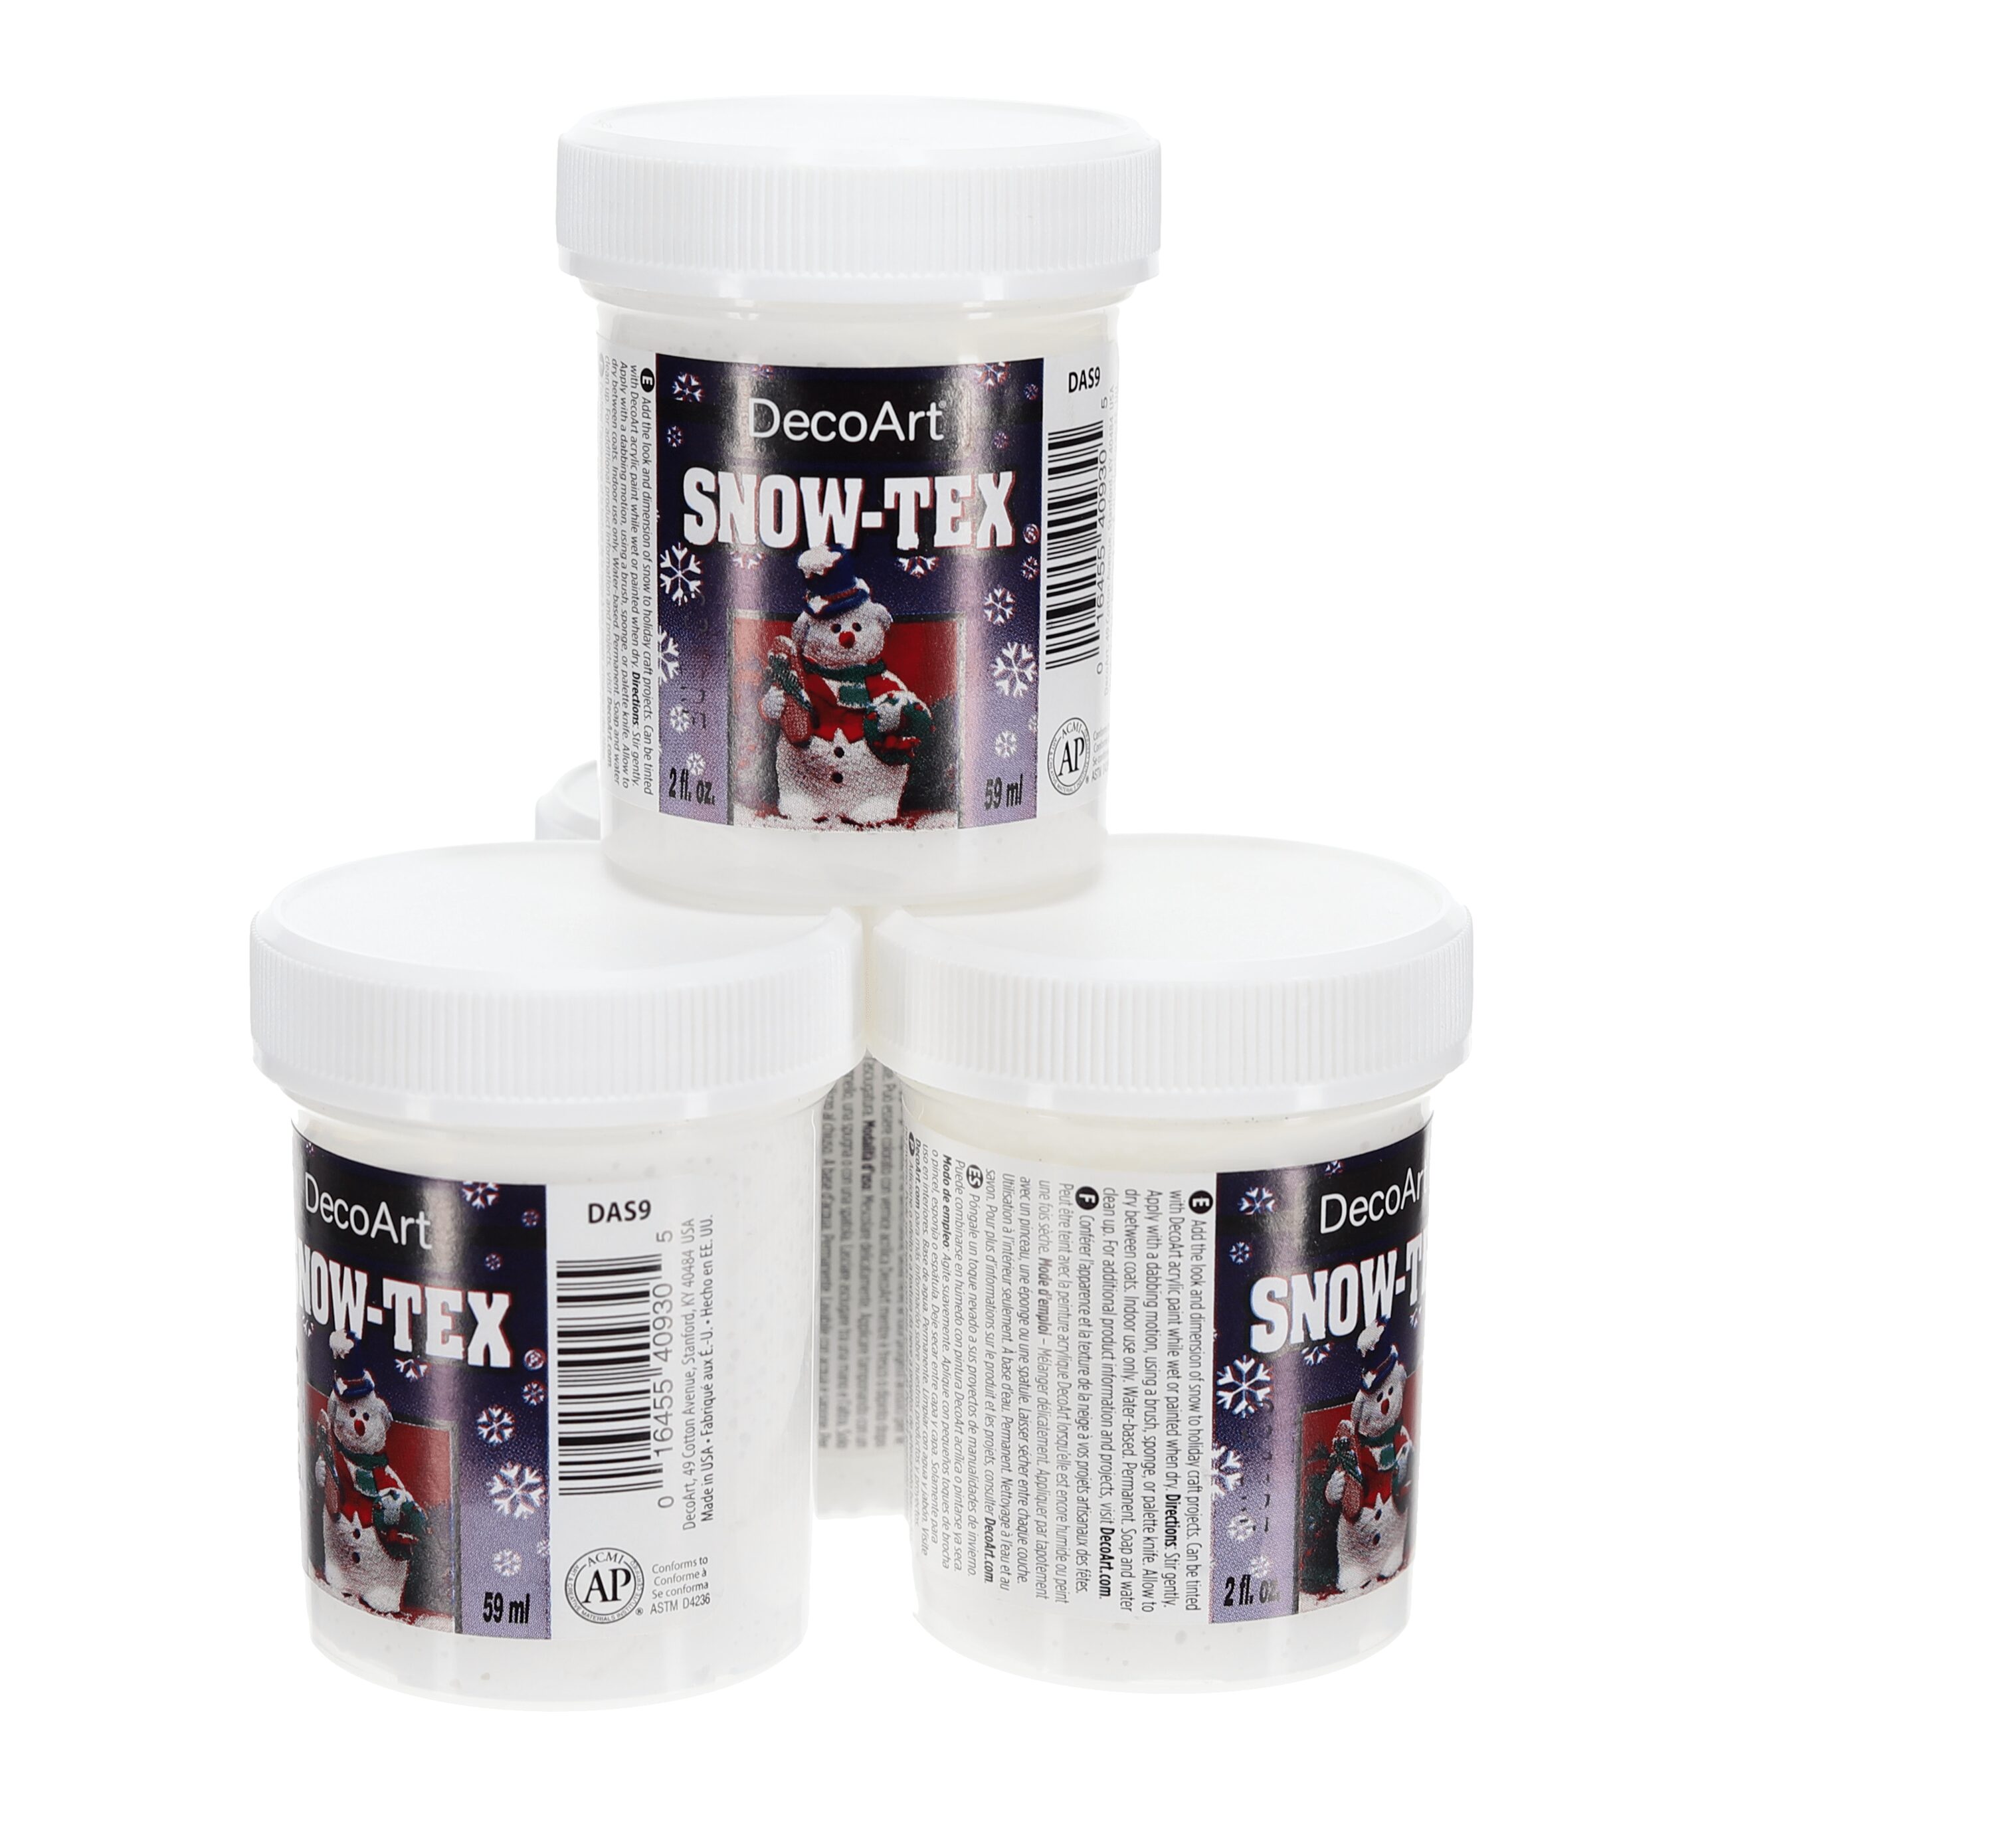 Castin Craft Clear Polyester Casting Resin with Catalyst 32 oz.